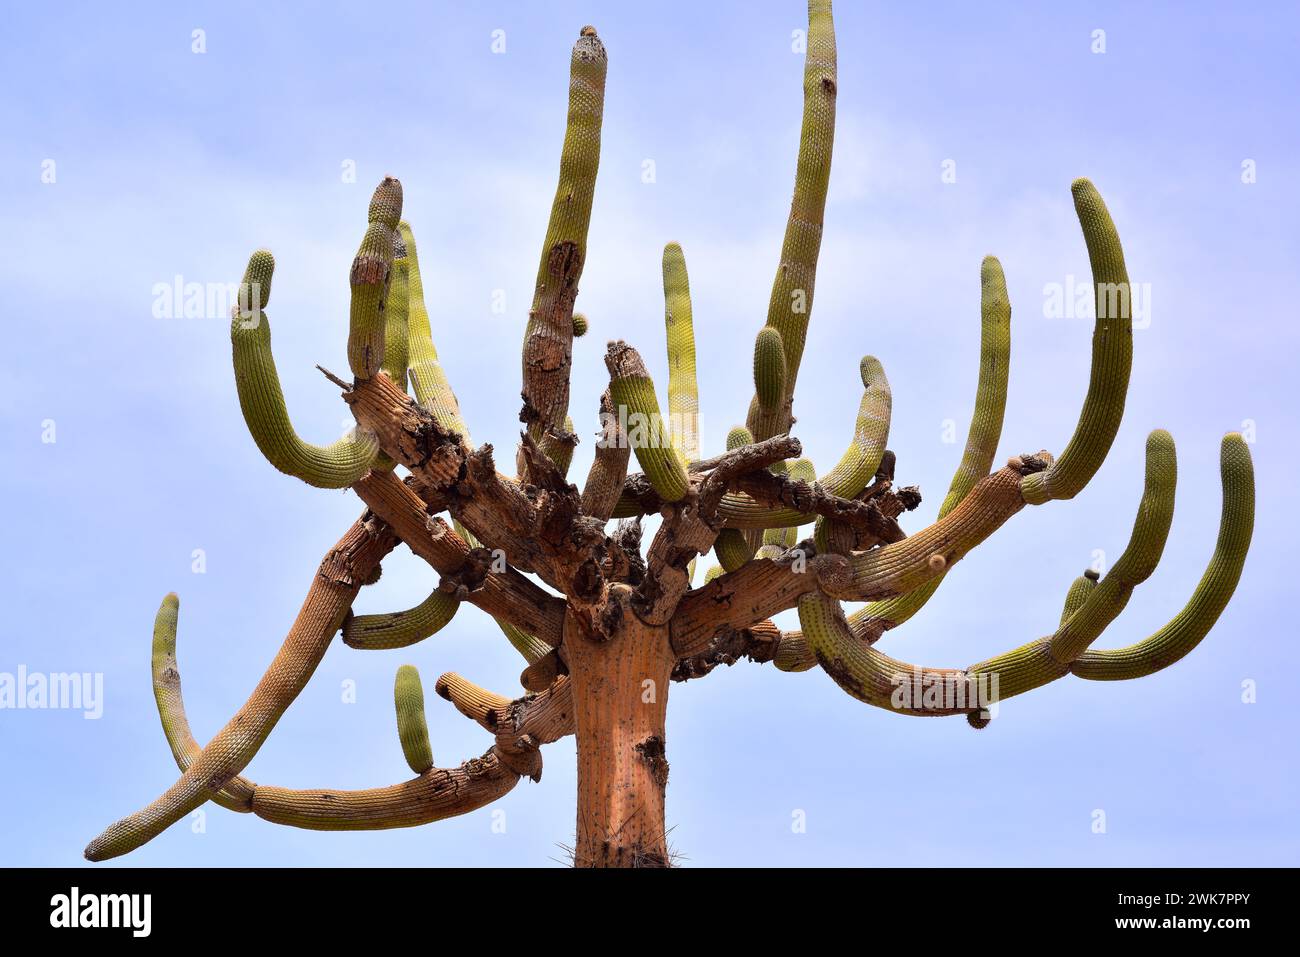 Candleholder cactus or cactus candelabro (Browningia candelaris) is an arborescent cactus endemic to northern Chile and southern Peru. This photo was Stock Photo